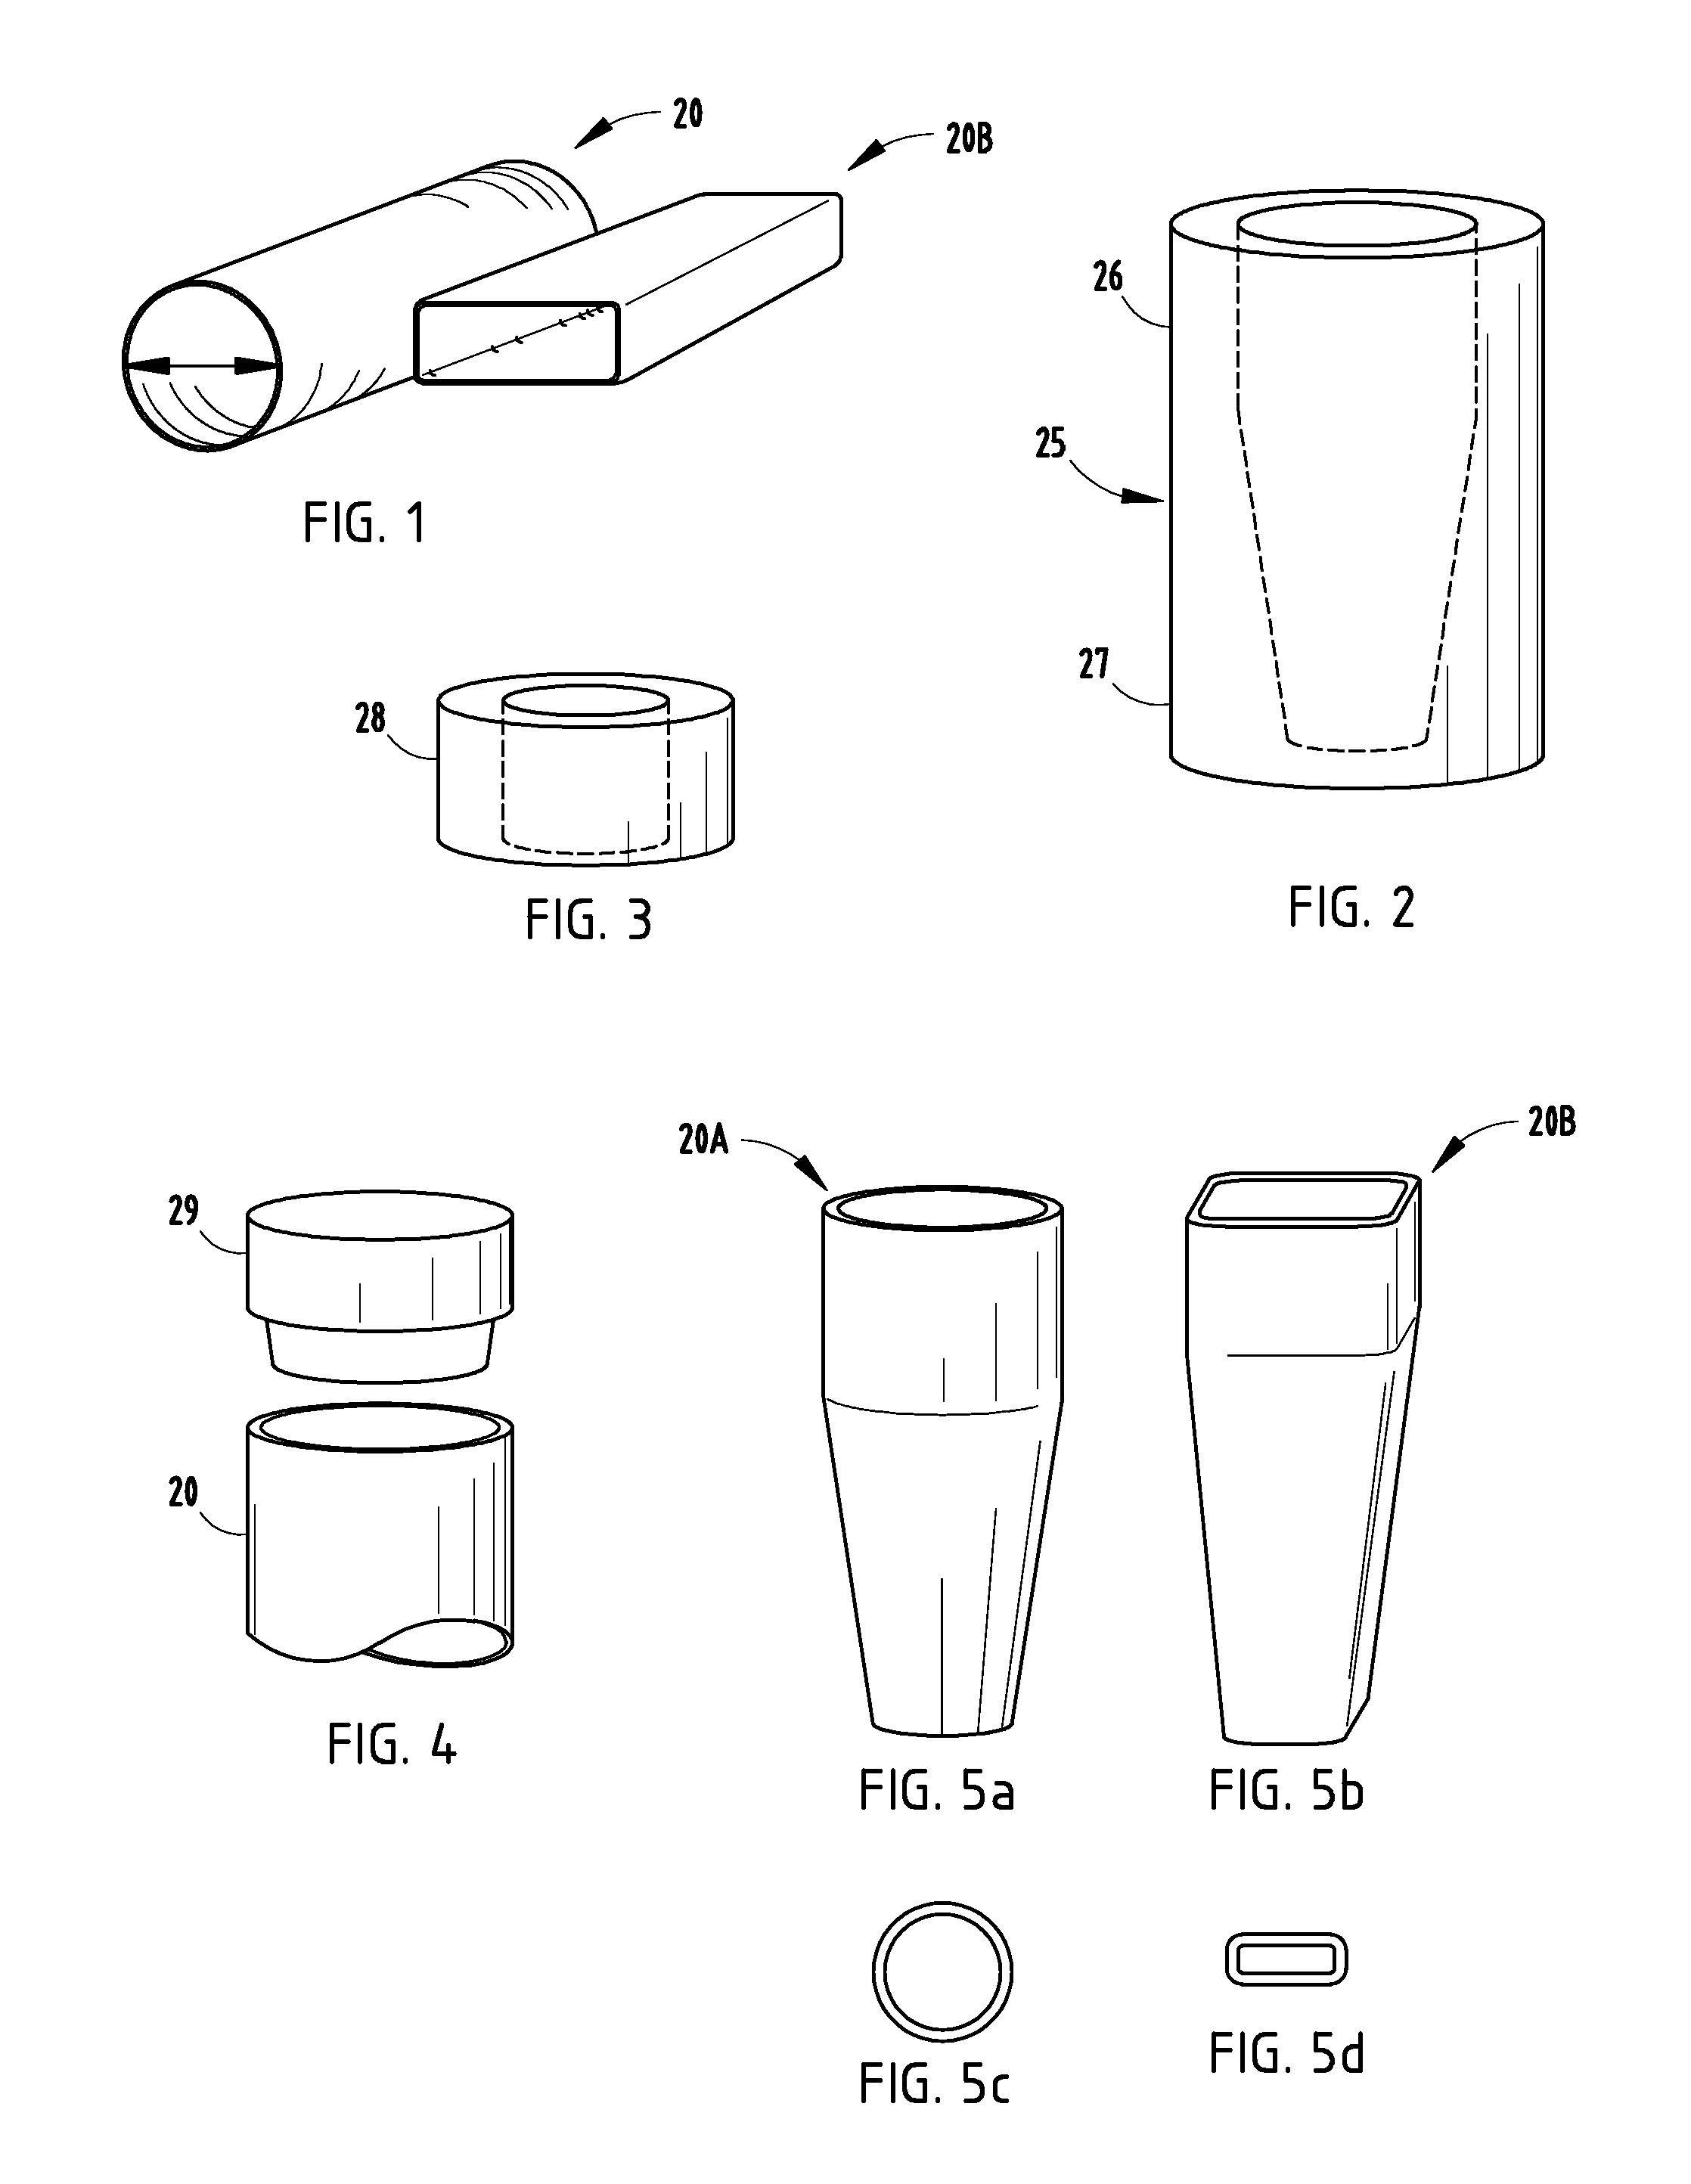 Tubular tapered crushable structures and manufacturing methods